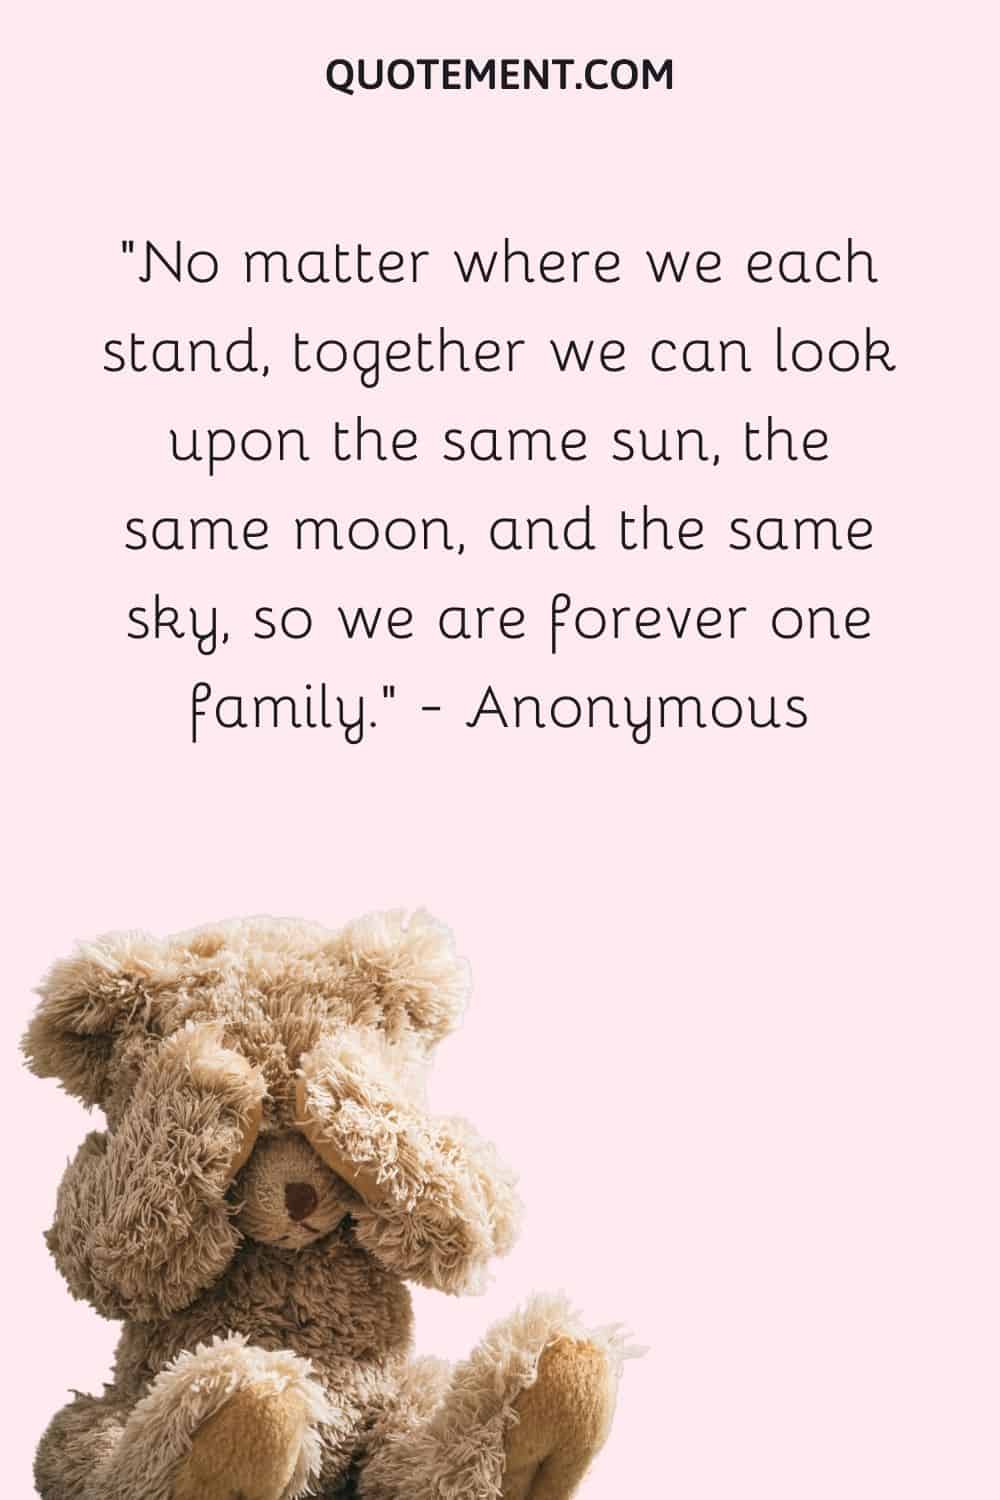 No matter where we each stand, together we can look upon the same sun, the same moon, and the same sky, so we are forever one family. — Anonymous